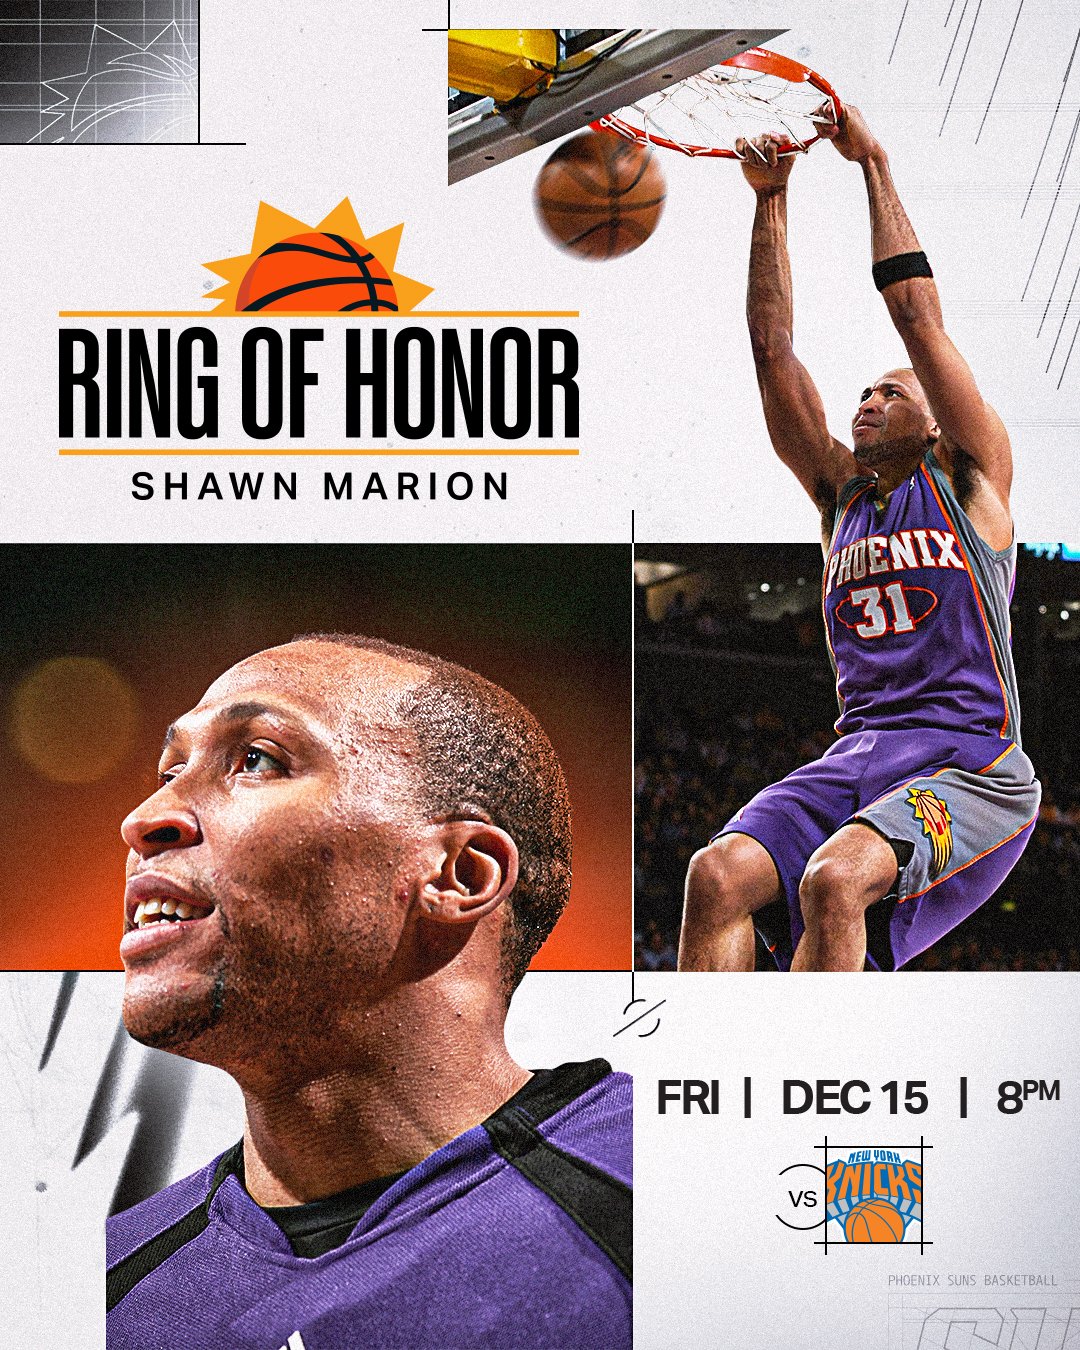 Phoenix Suns on X: The Matrix is being inducted into the Suns Ring of Honor  ☄️ Join us on 12.15 as we honor one of the greatest to ever wear a Suns